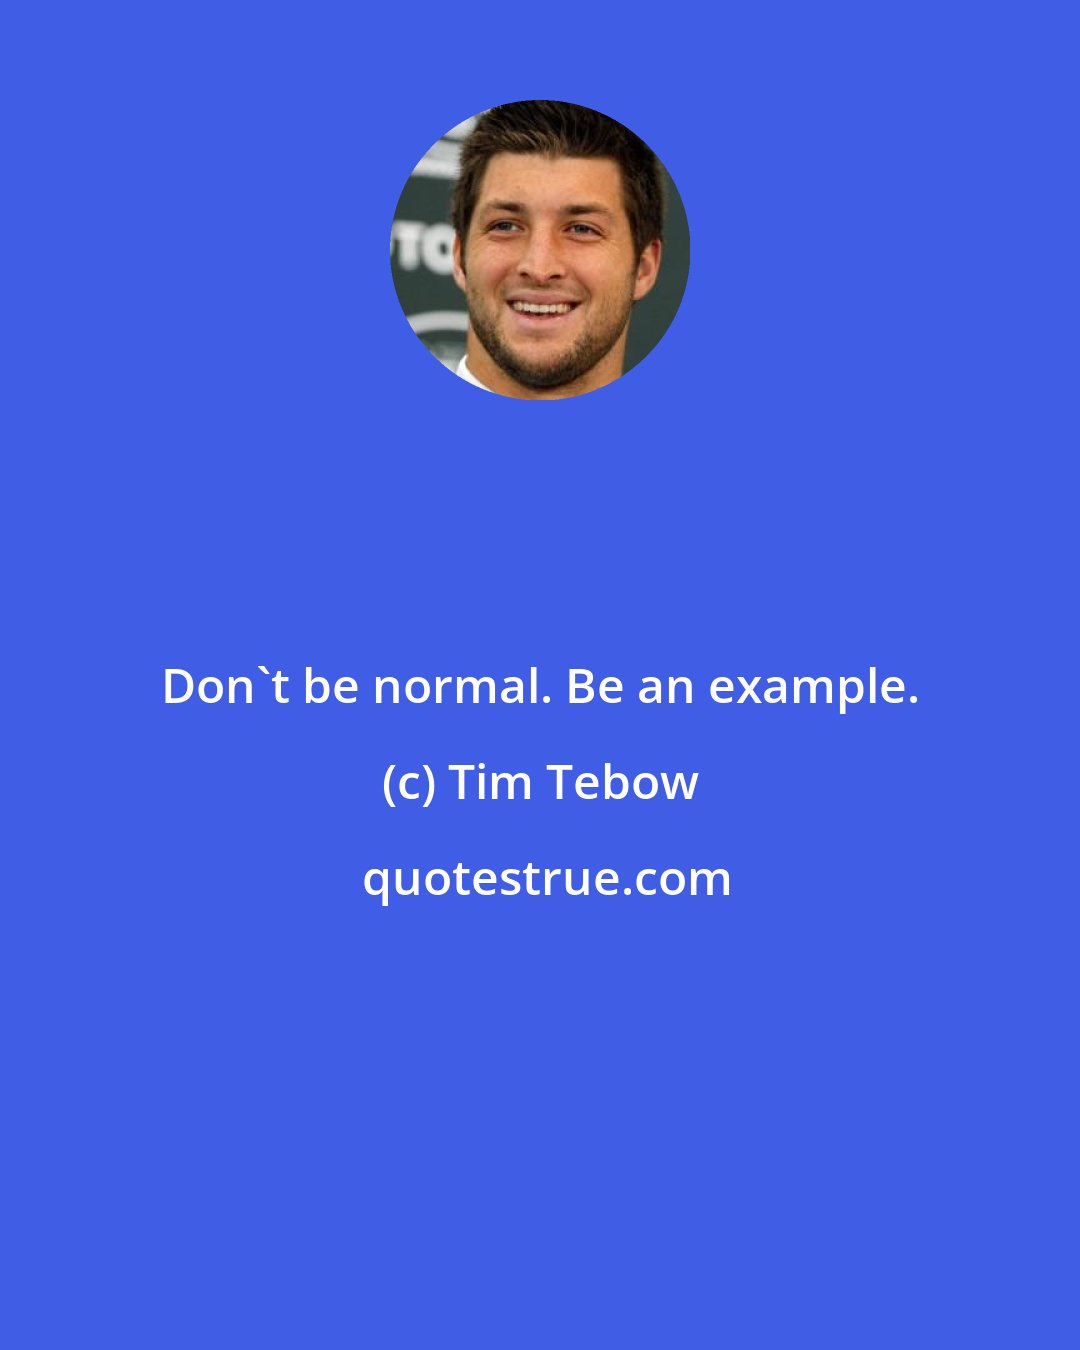 Tim Tebow: Don't be normal. Be an example.